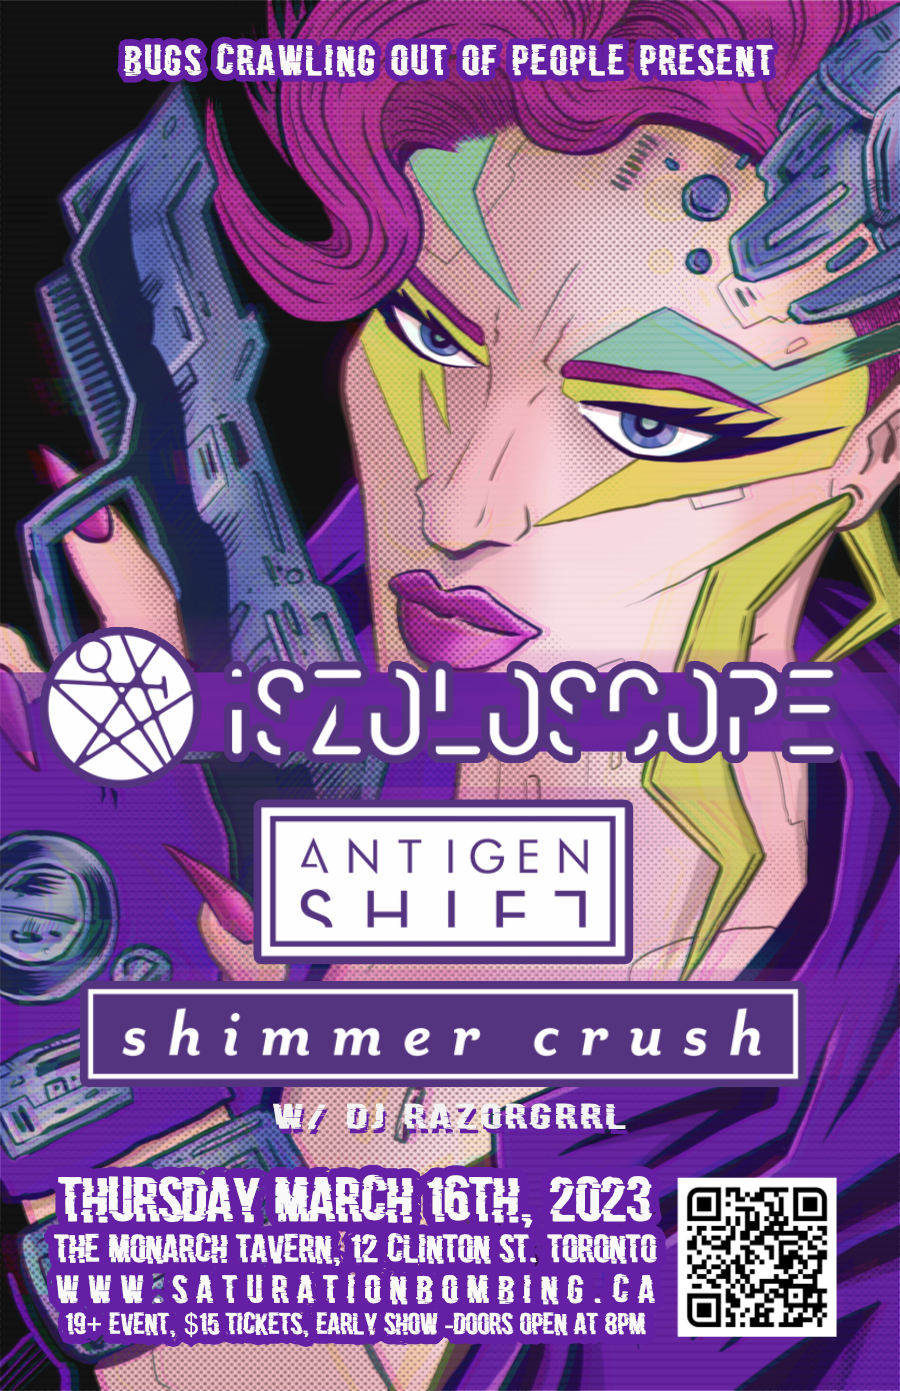 iszoloscope / antigen shift and shimmer crush live in Toronto, Thursday March 23rd, 2023